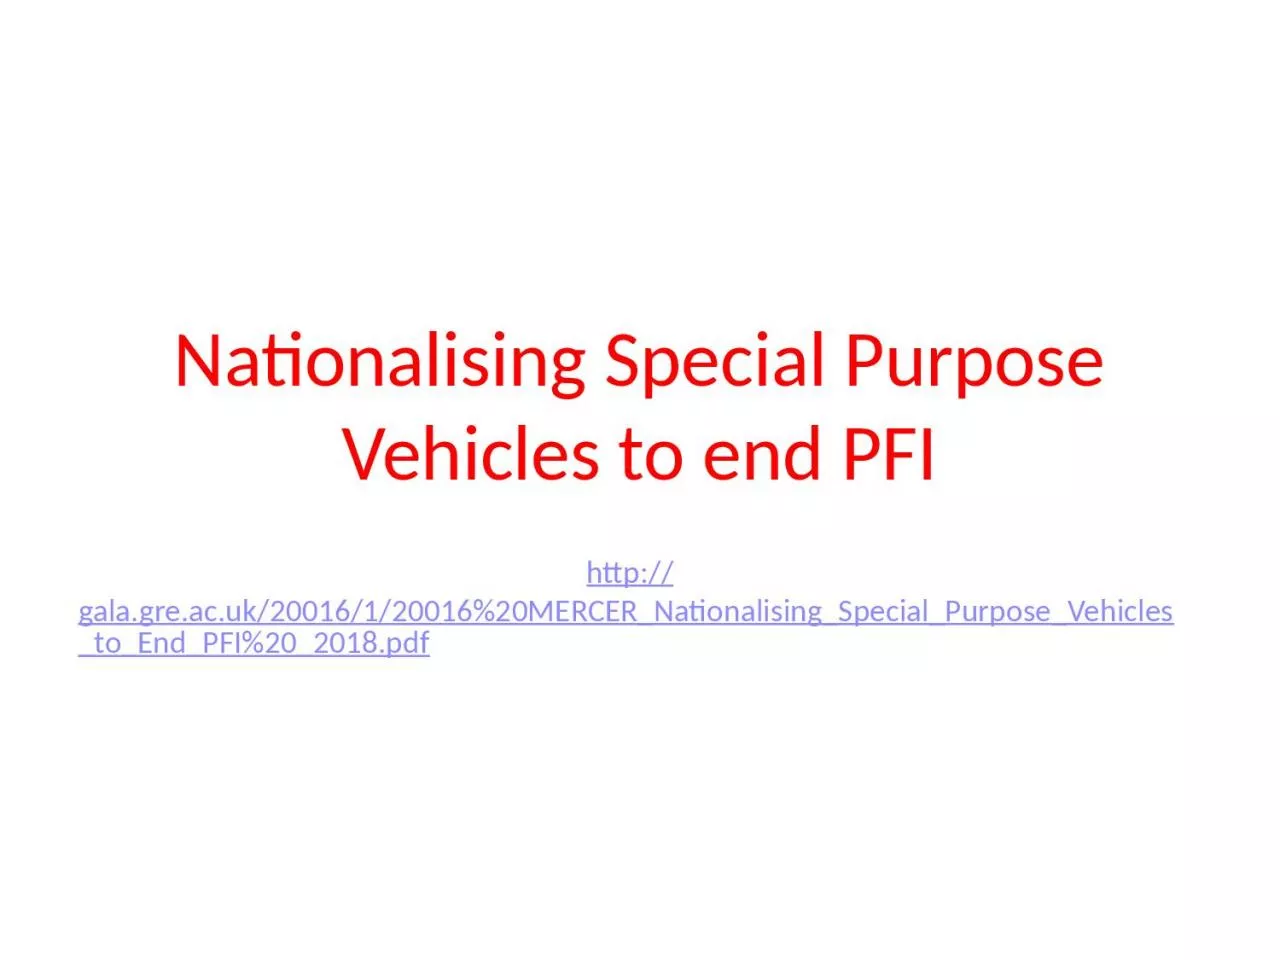 Nationalising Special Purpose Vehicles to end PFI